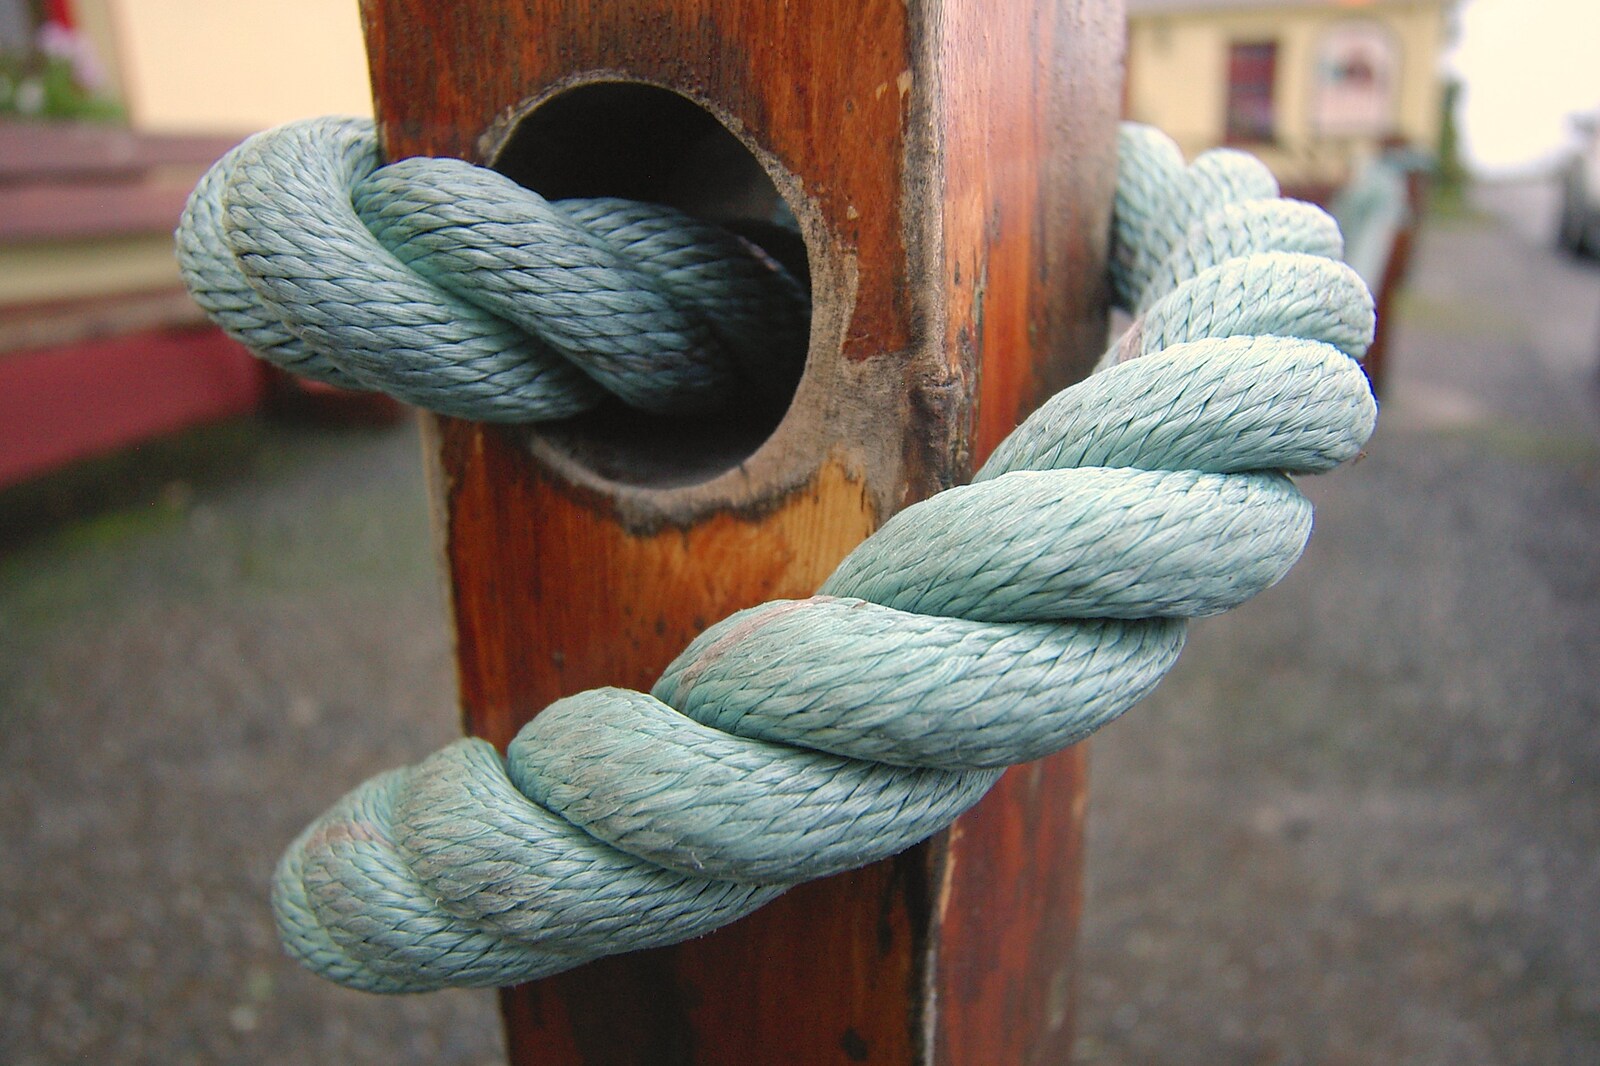 A blue rope from Corofin, Ennistymon and The Burran, County Clare, Western Ireland - 27th October 2006